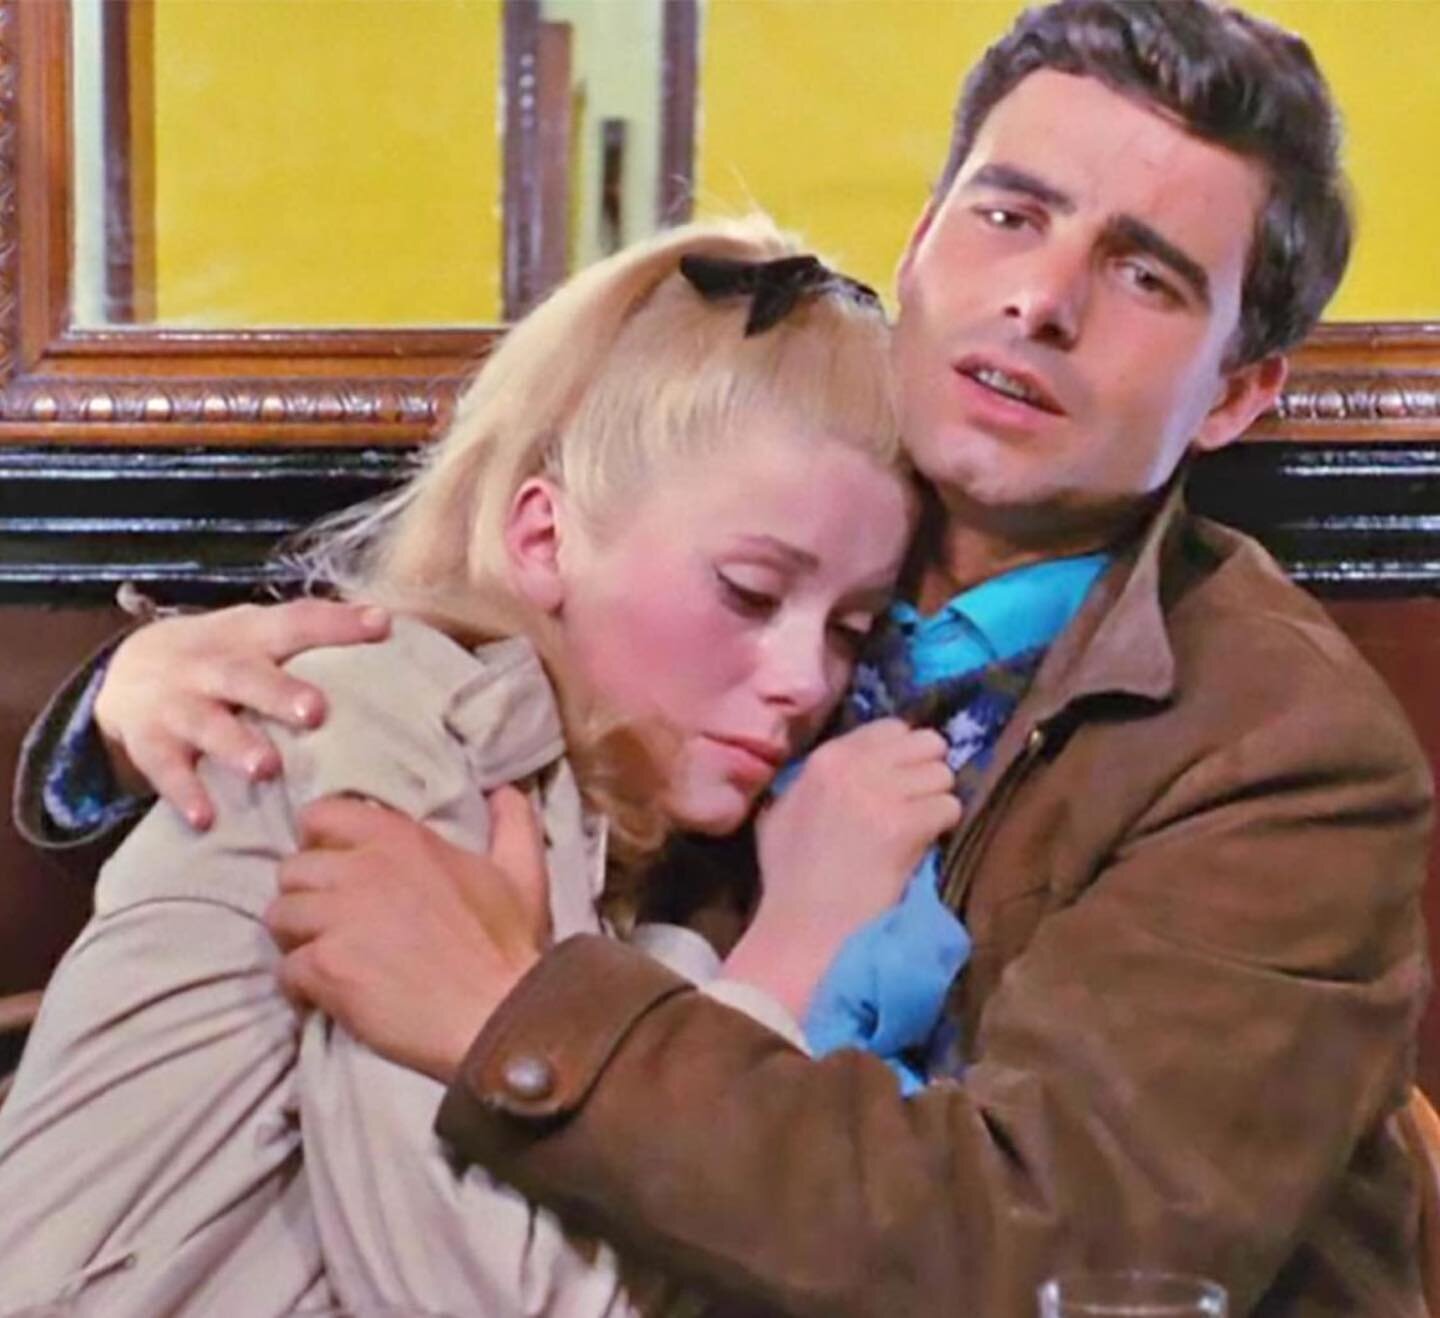 A slow time at the box office for art house films has me revisiting some of my favorite films from the past. This week, I rewatched &lsquo;The Umbrellas of Cherbourg&rsquo; from celebrated French filmmaker Jacques Demy. Romantic, vibrant, and heartbr